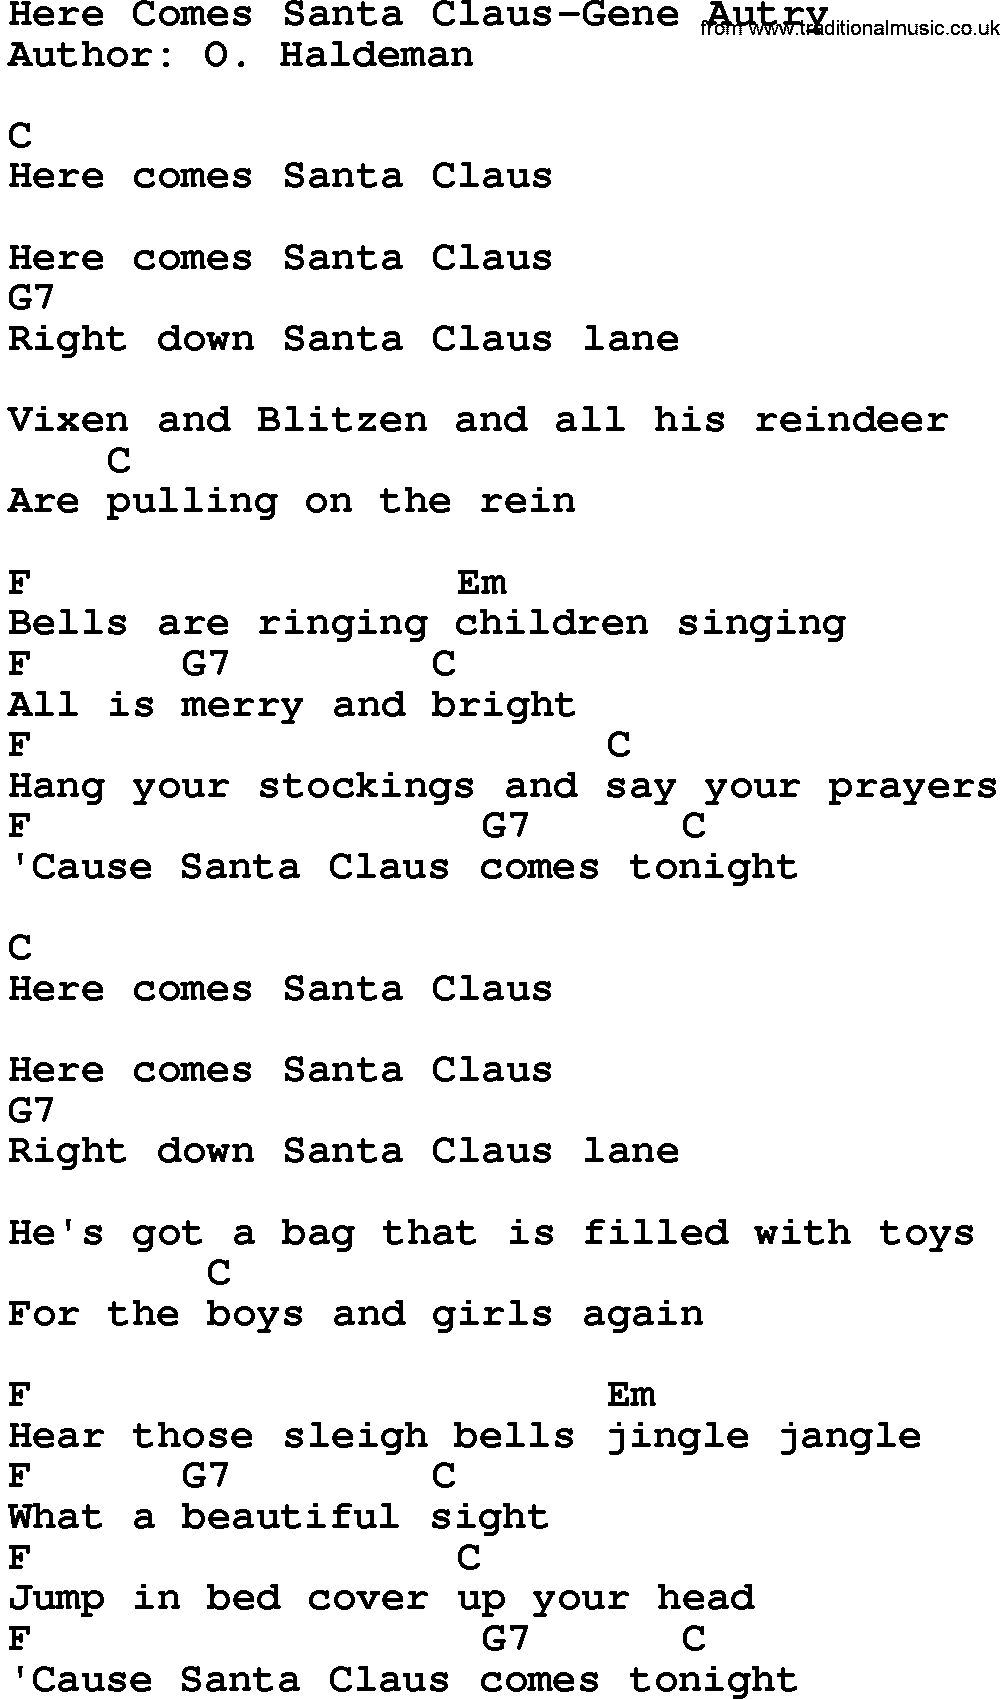 Country music song: Here Comes Santa Claus-Gene Autry lyrics and chords